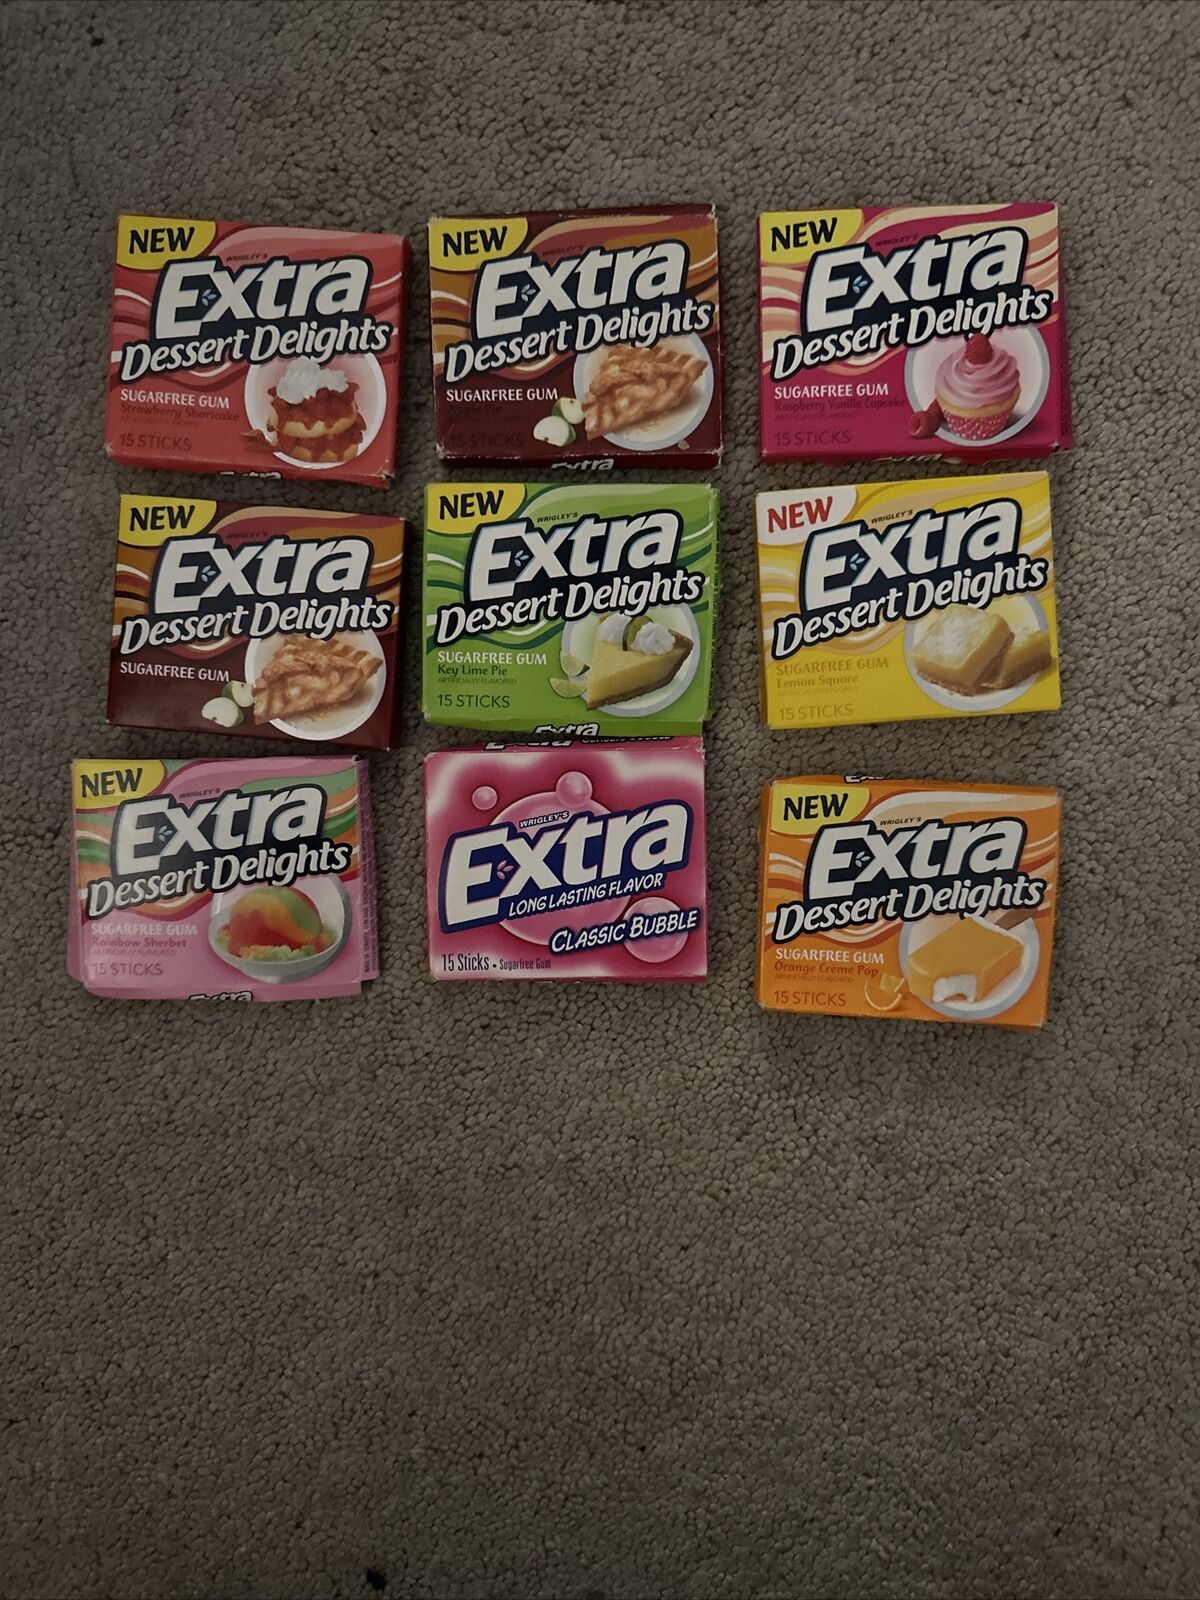 extra dessert delights gum USED OPEDED BOXES